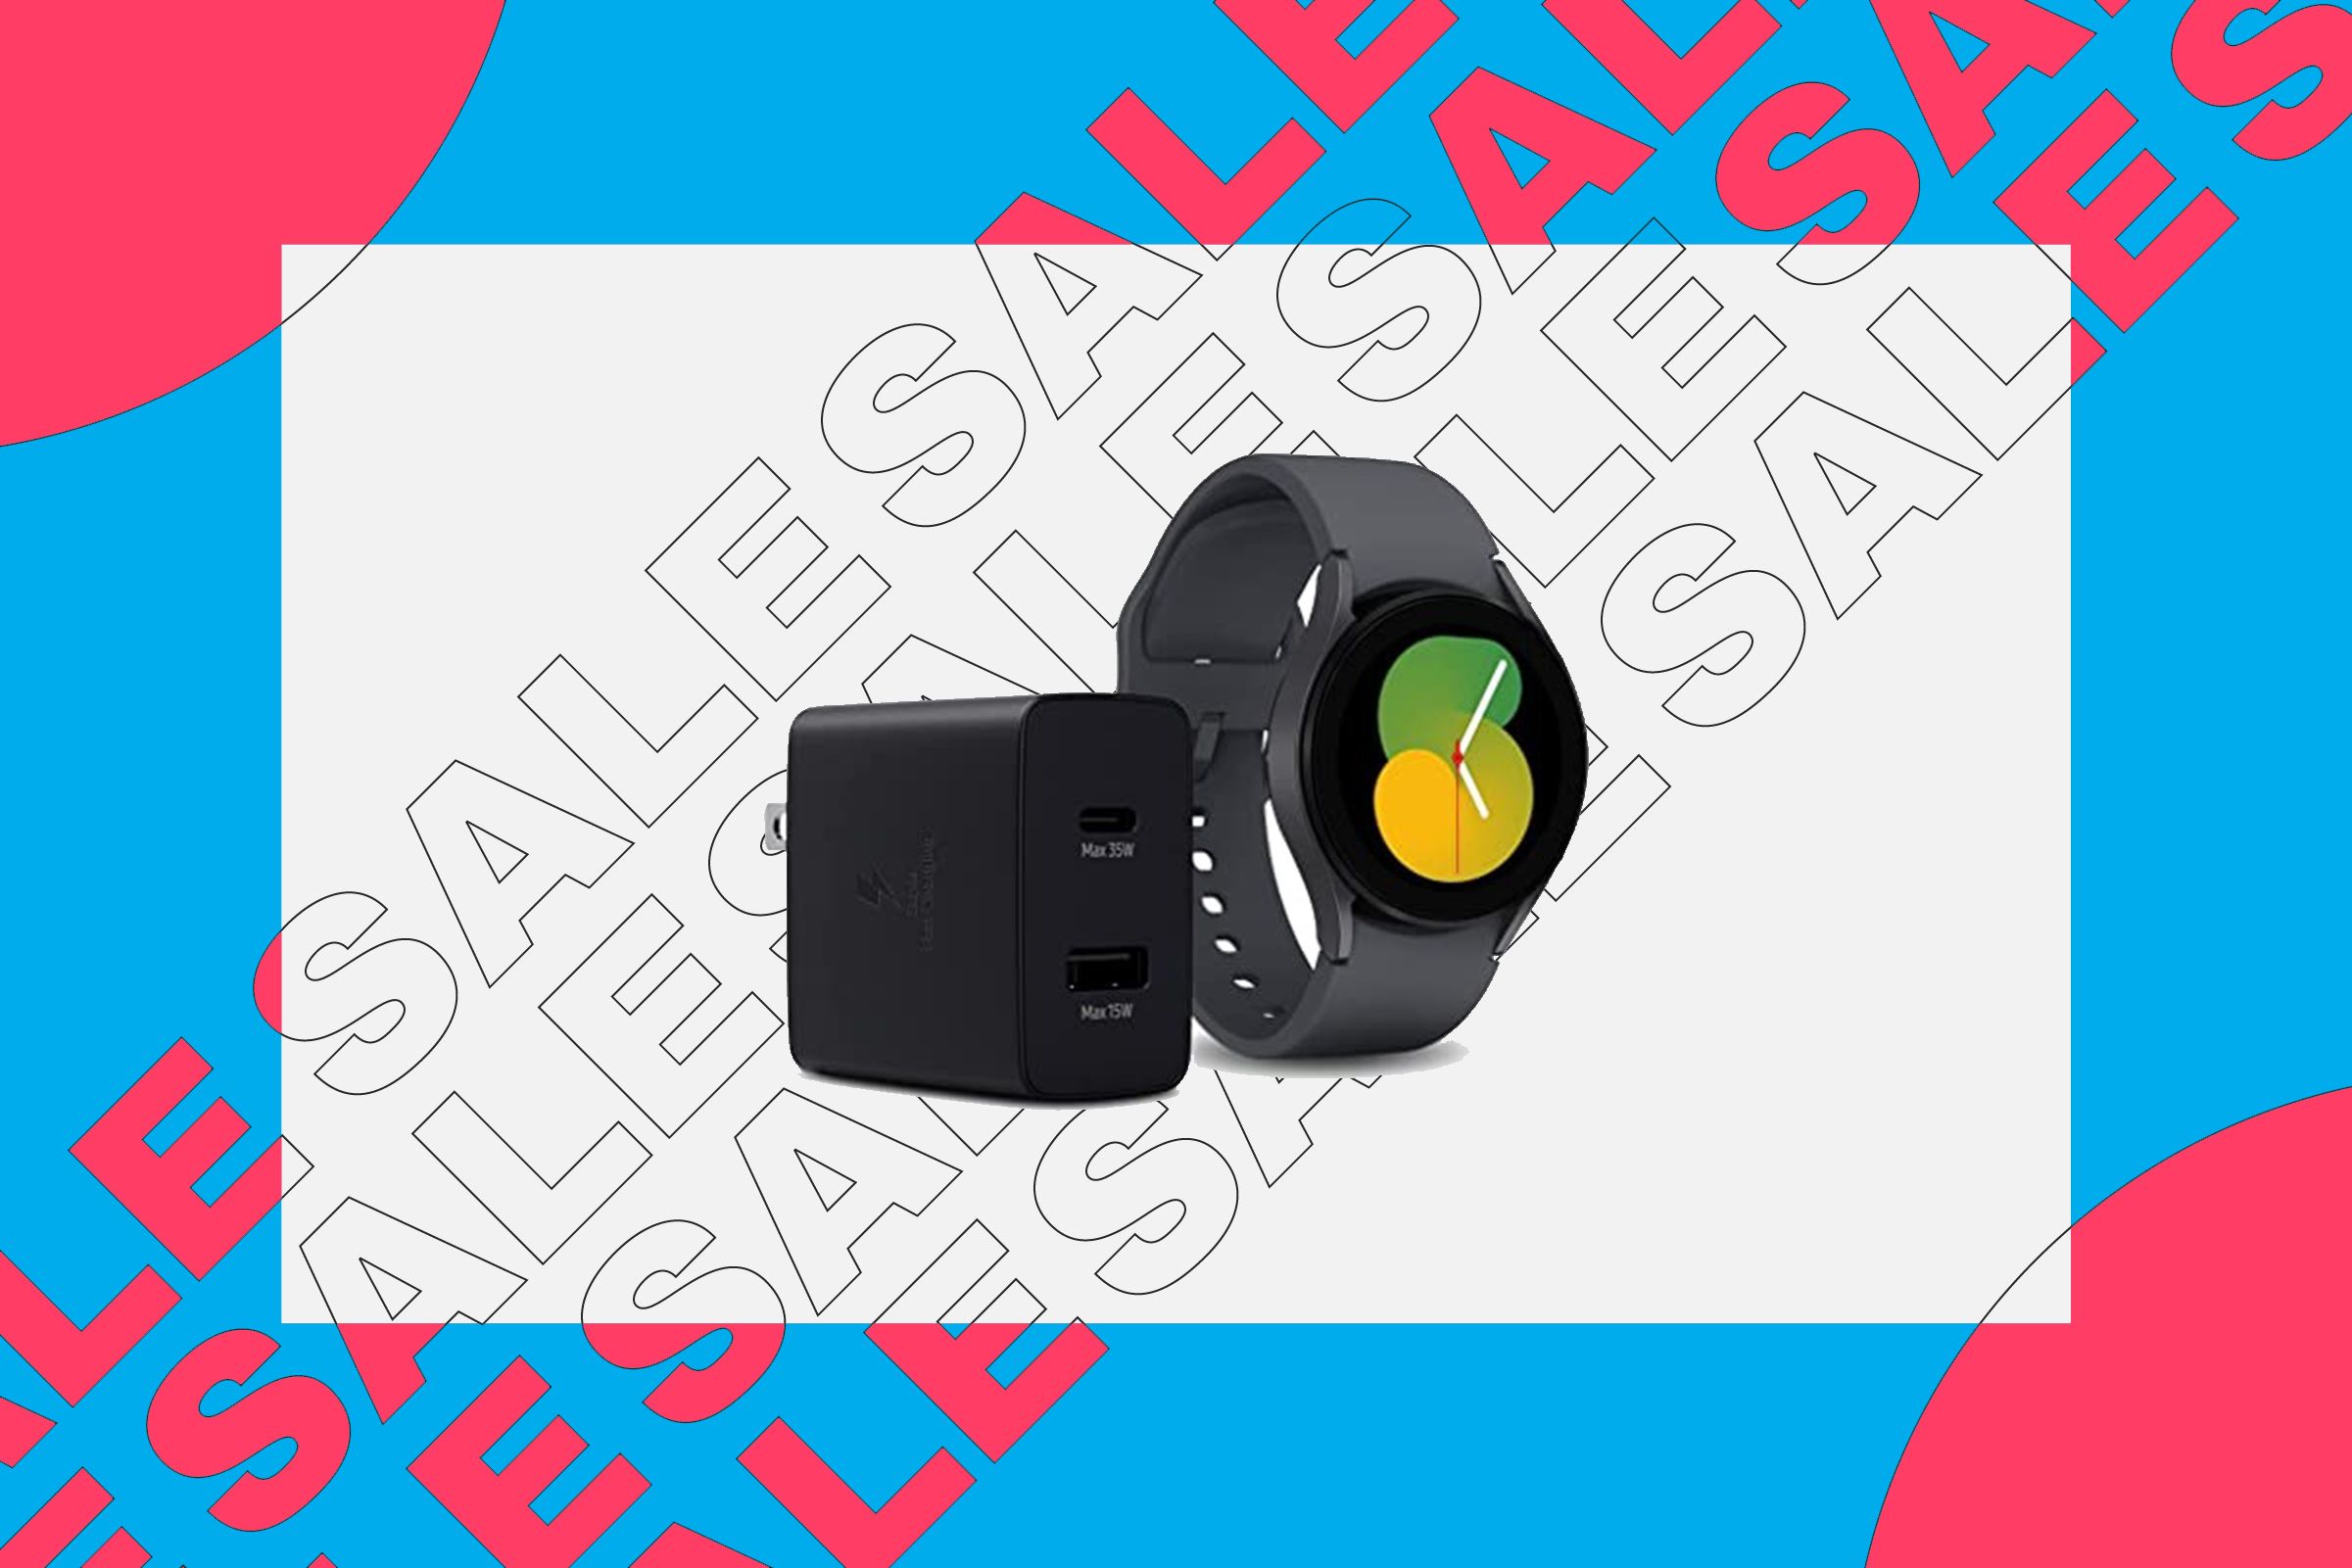 Samsung Galaxy Watch 5 and 35W Duo Wall Charger with sale illustration in the background.